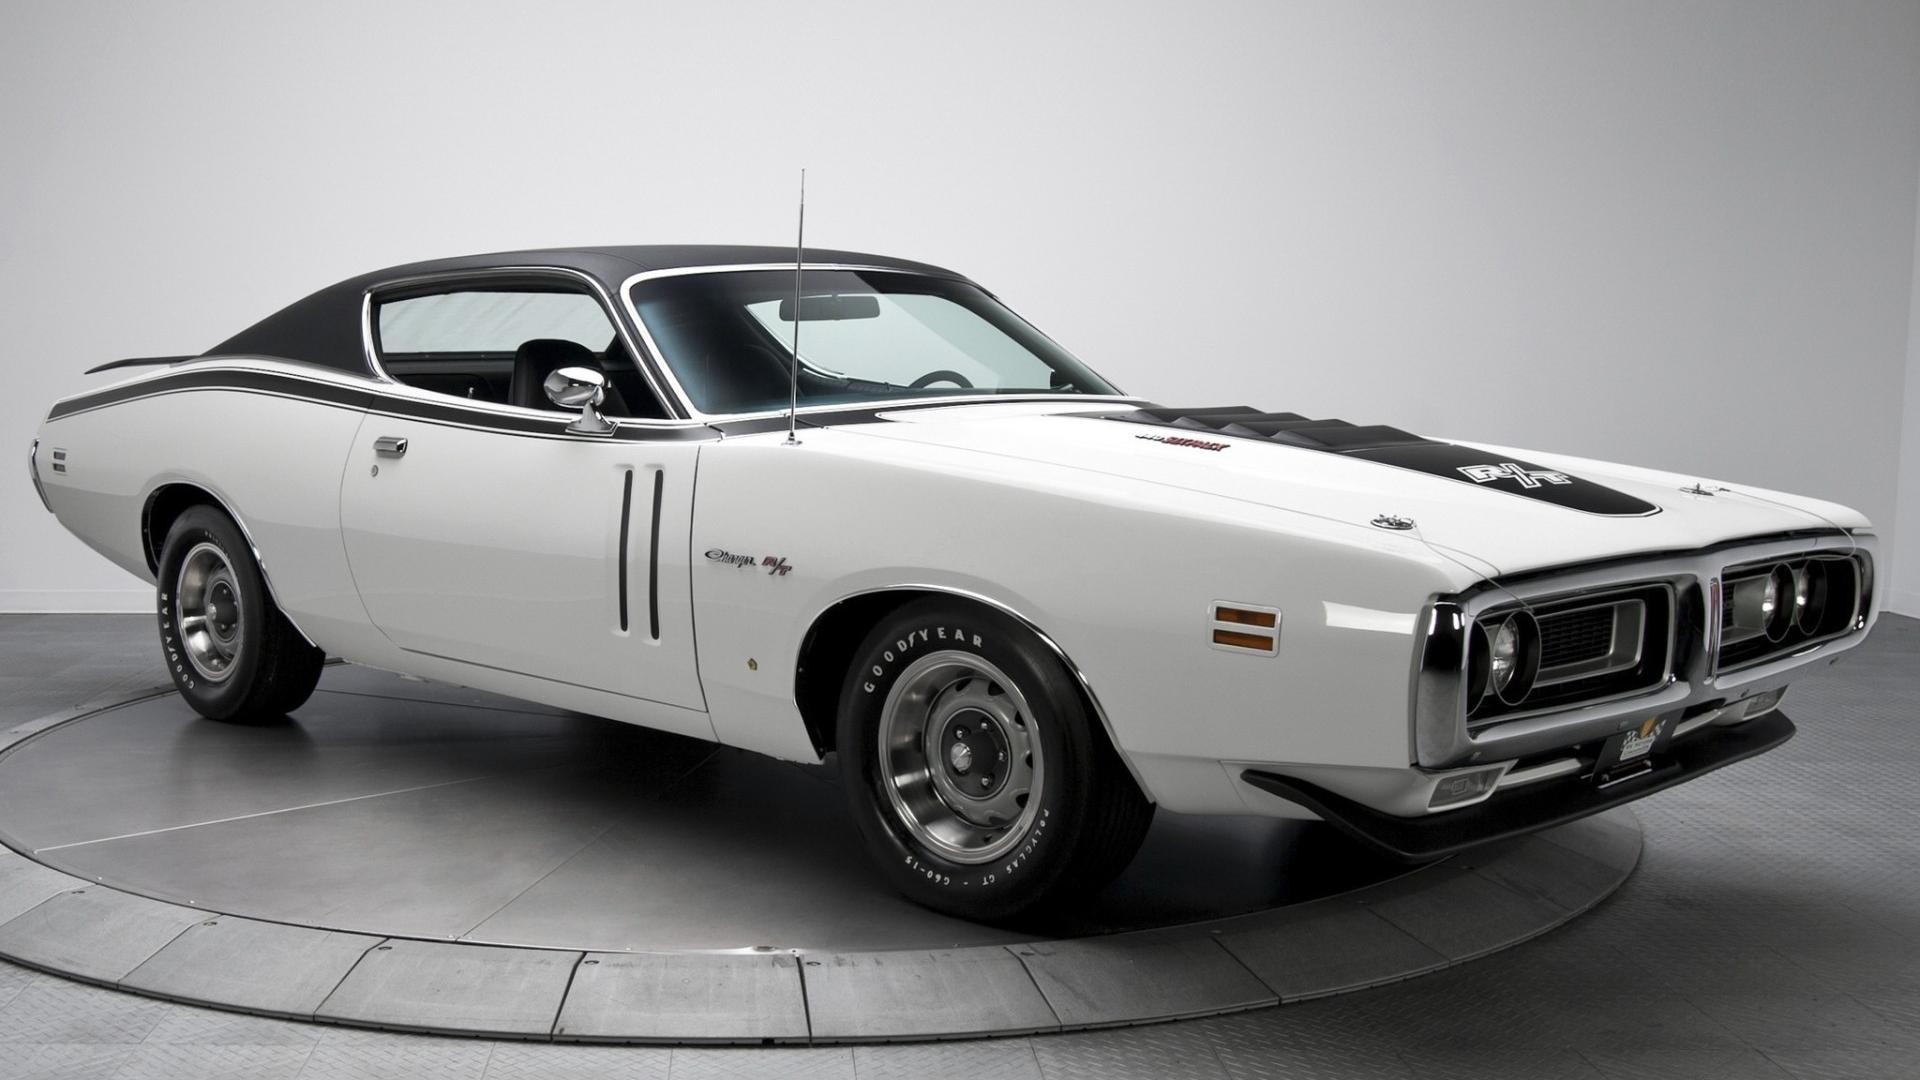 1920x1080 Dodge charger 1970 muscle car six wallpaper | (63740)